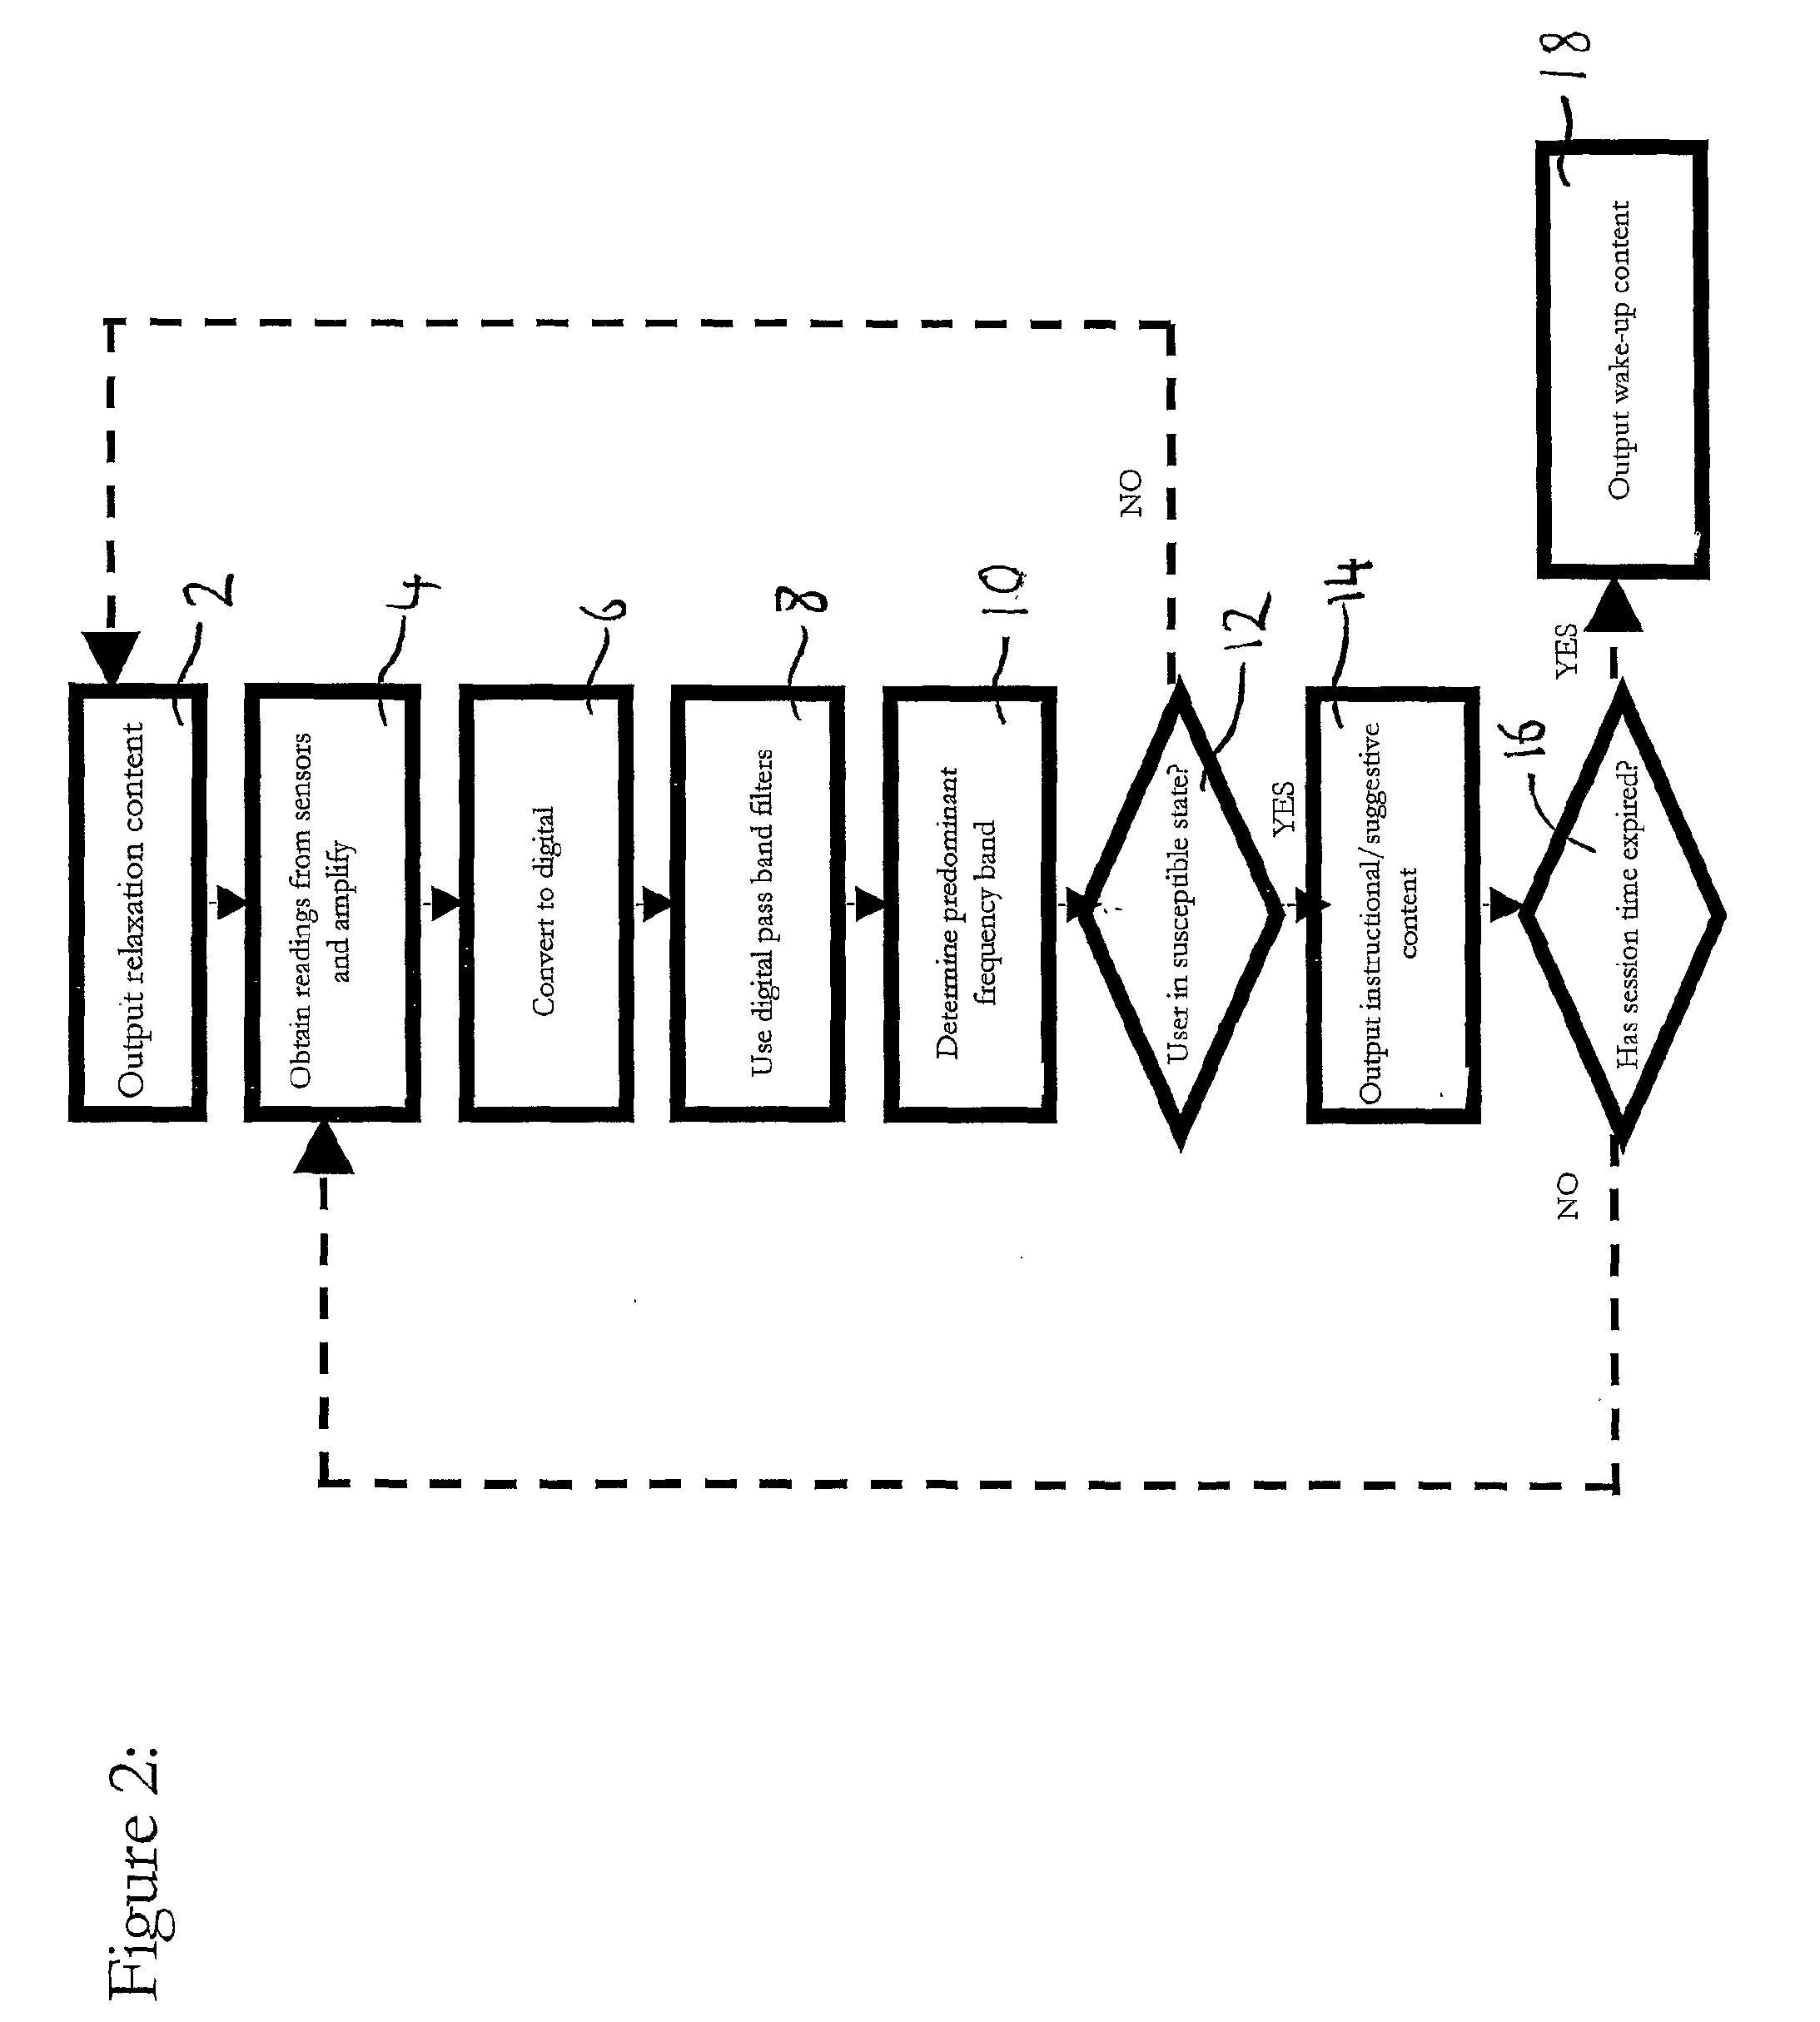 Medical hypnosis device for controlling the administration of a hypnosis experience